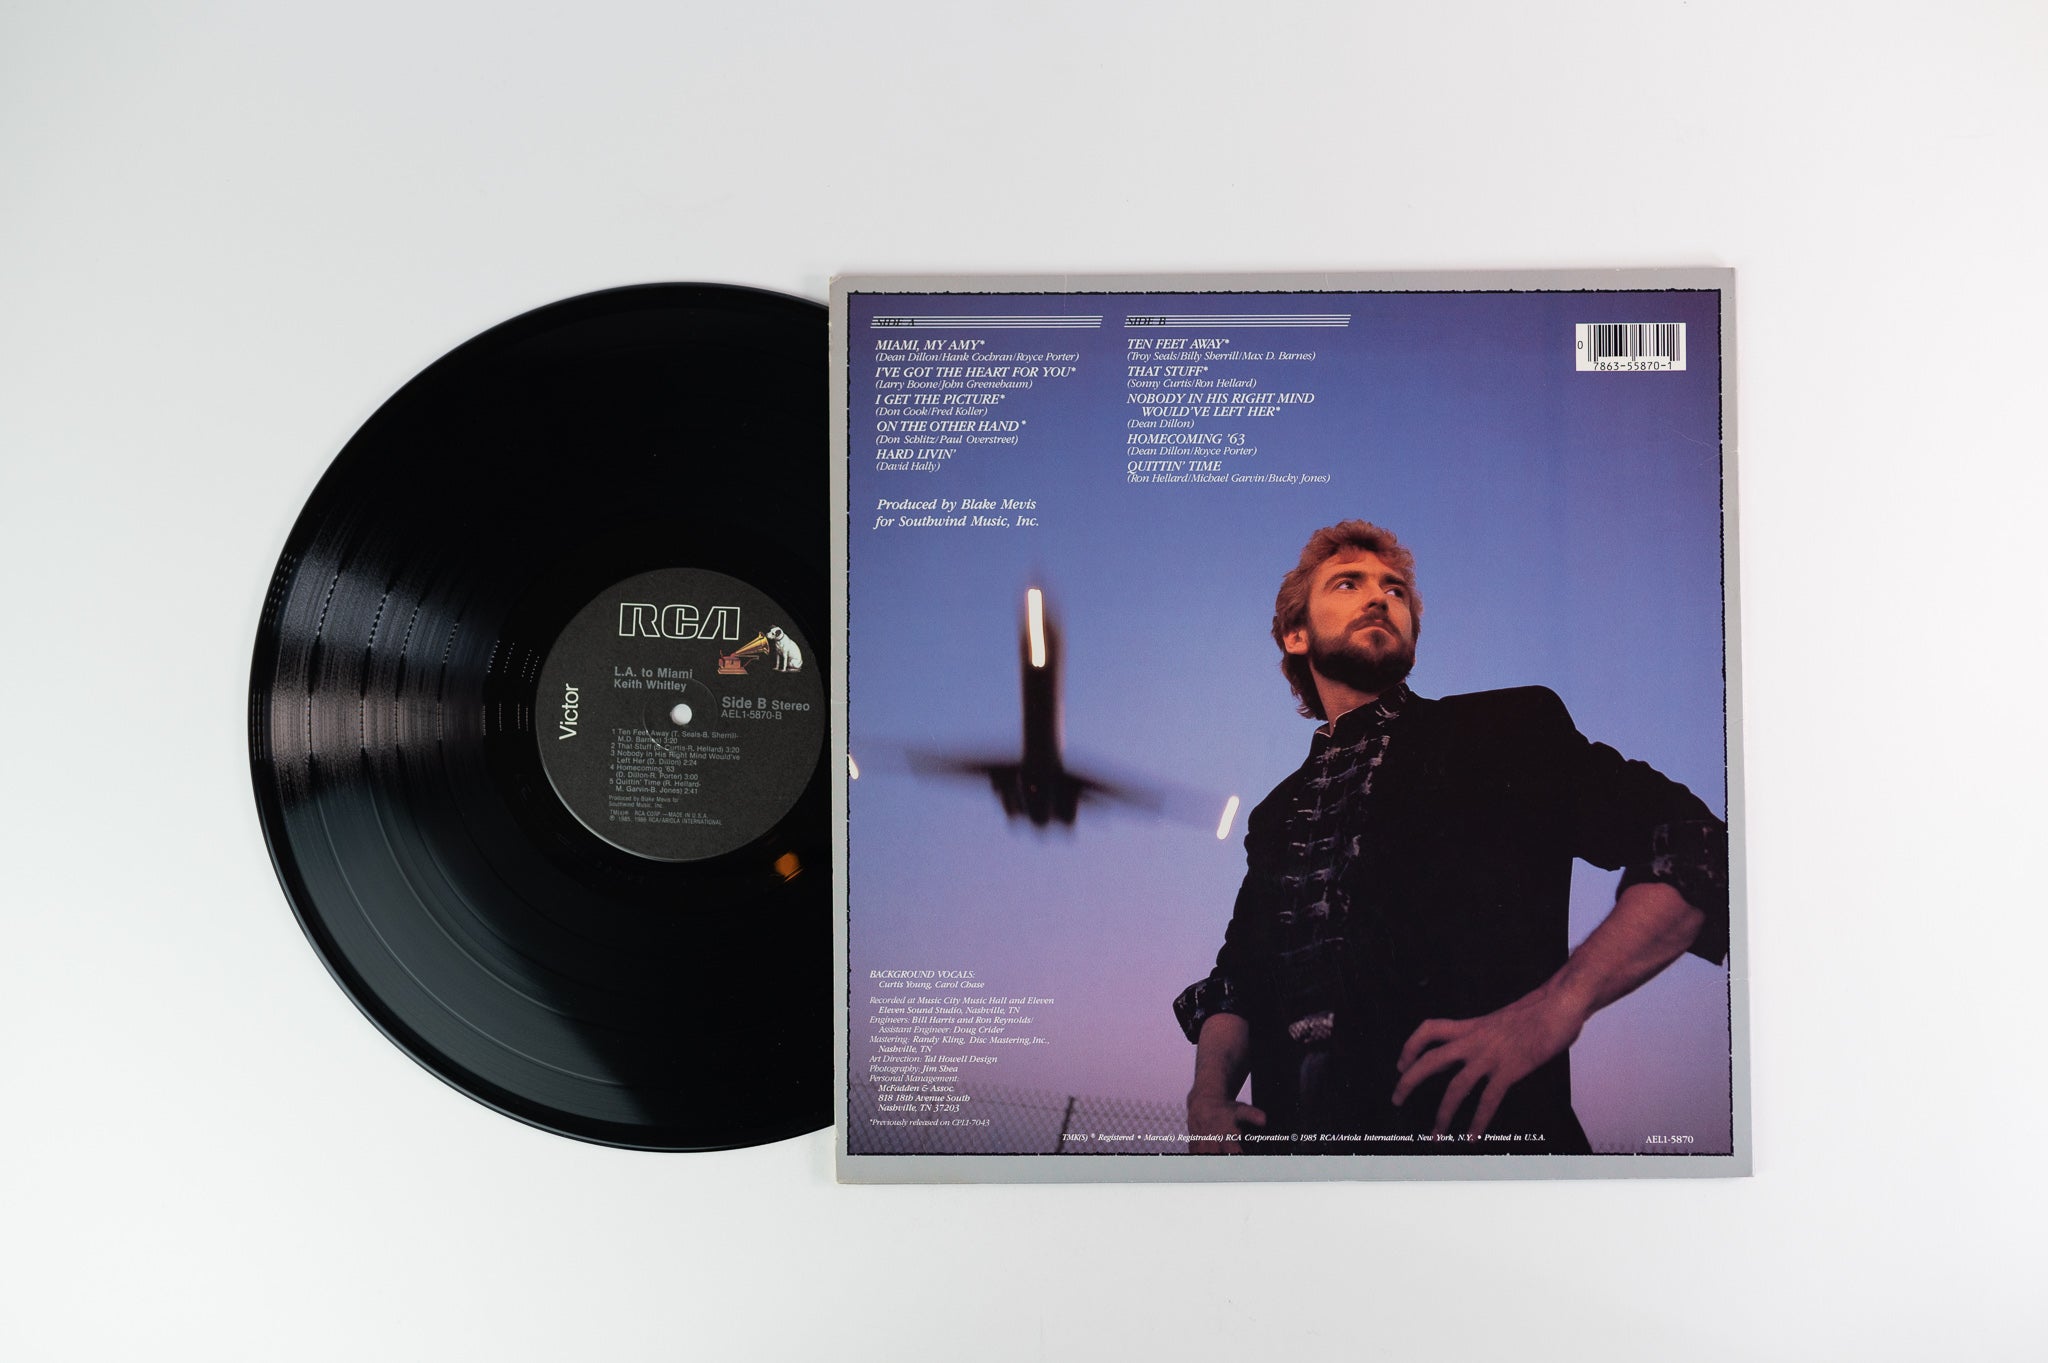 Keith Whitley - L.A. To Miami on RCA Victor